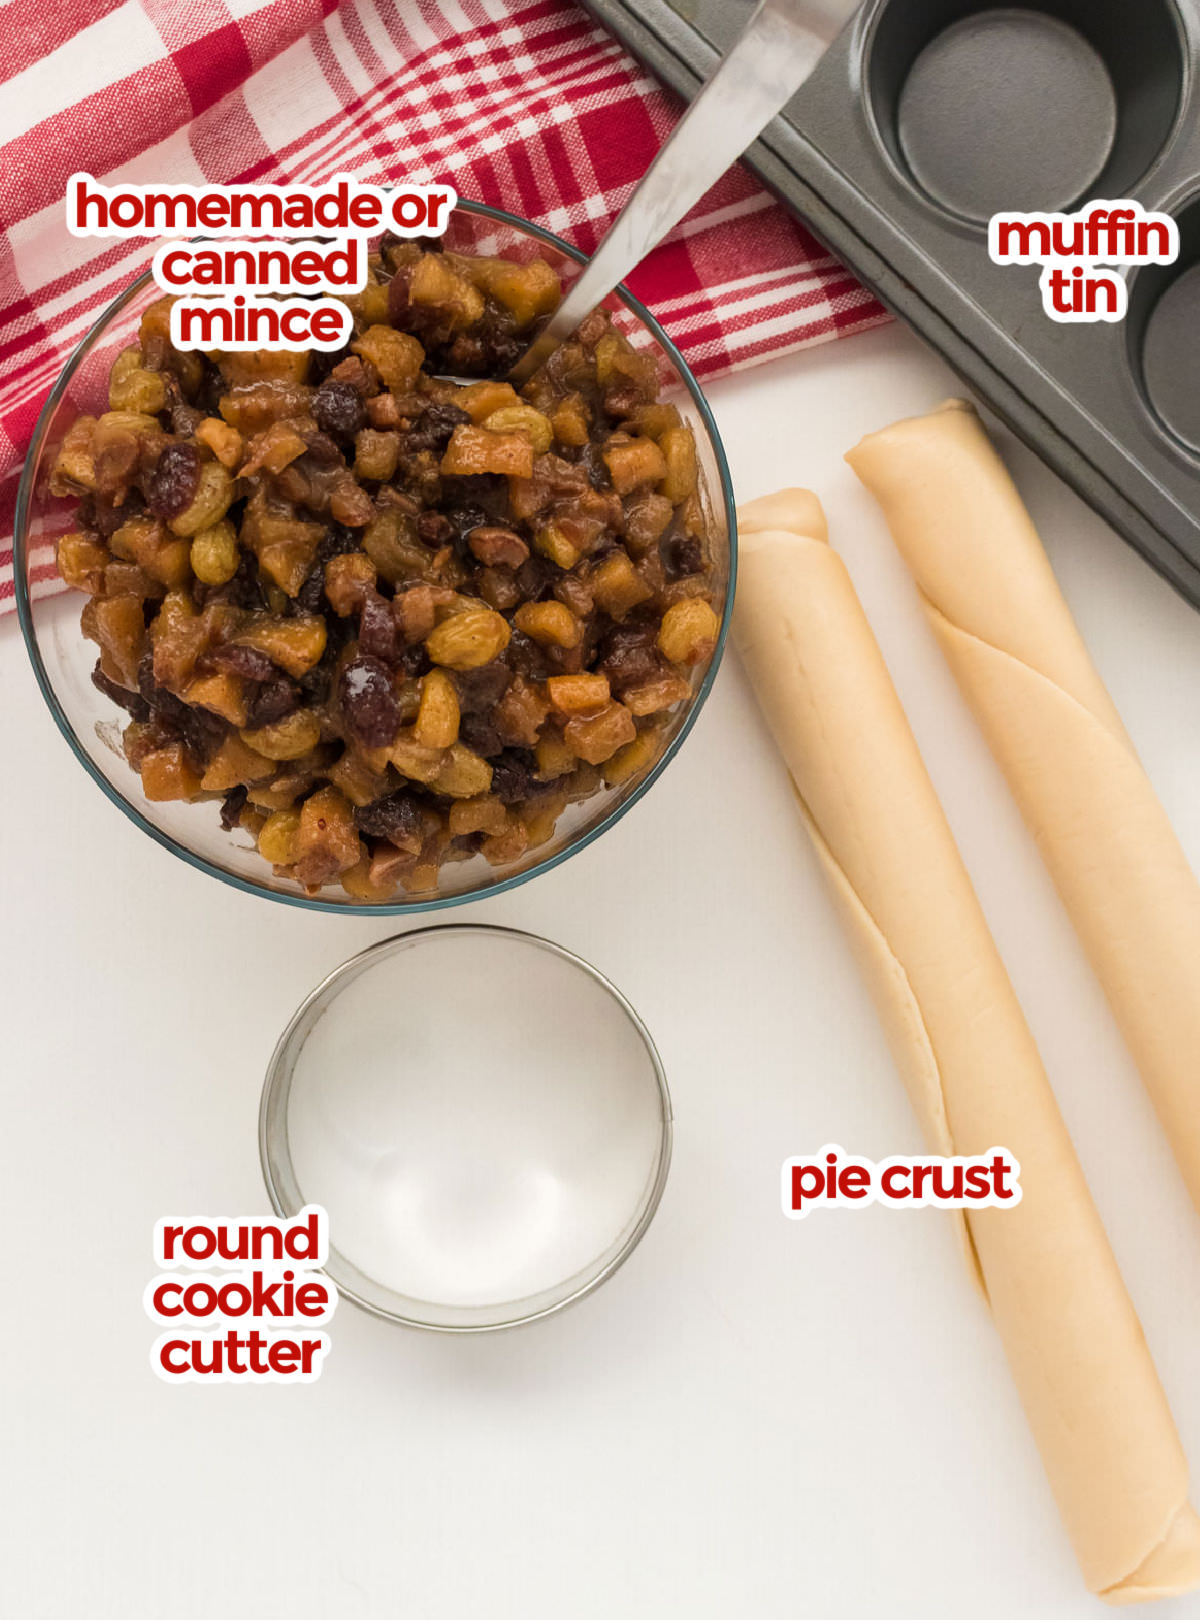 All the ingredients you will need to make Mini Mince Pies including mincemeat, pie crust, muffin tin and a round cookie cutter.